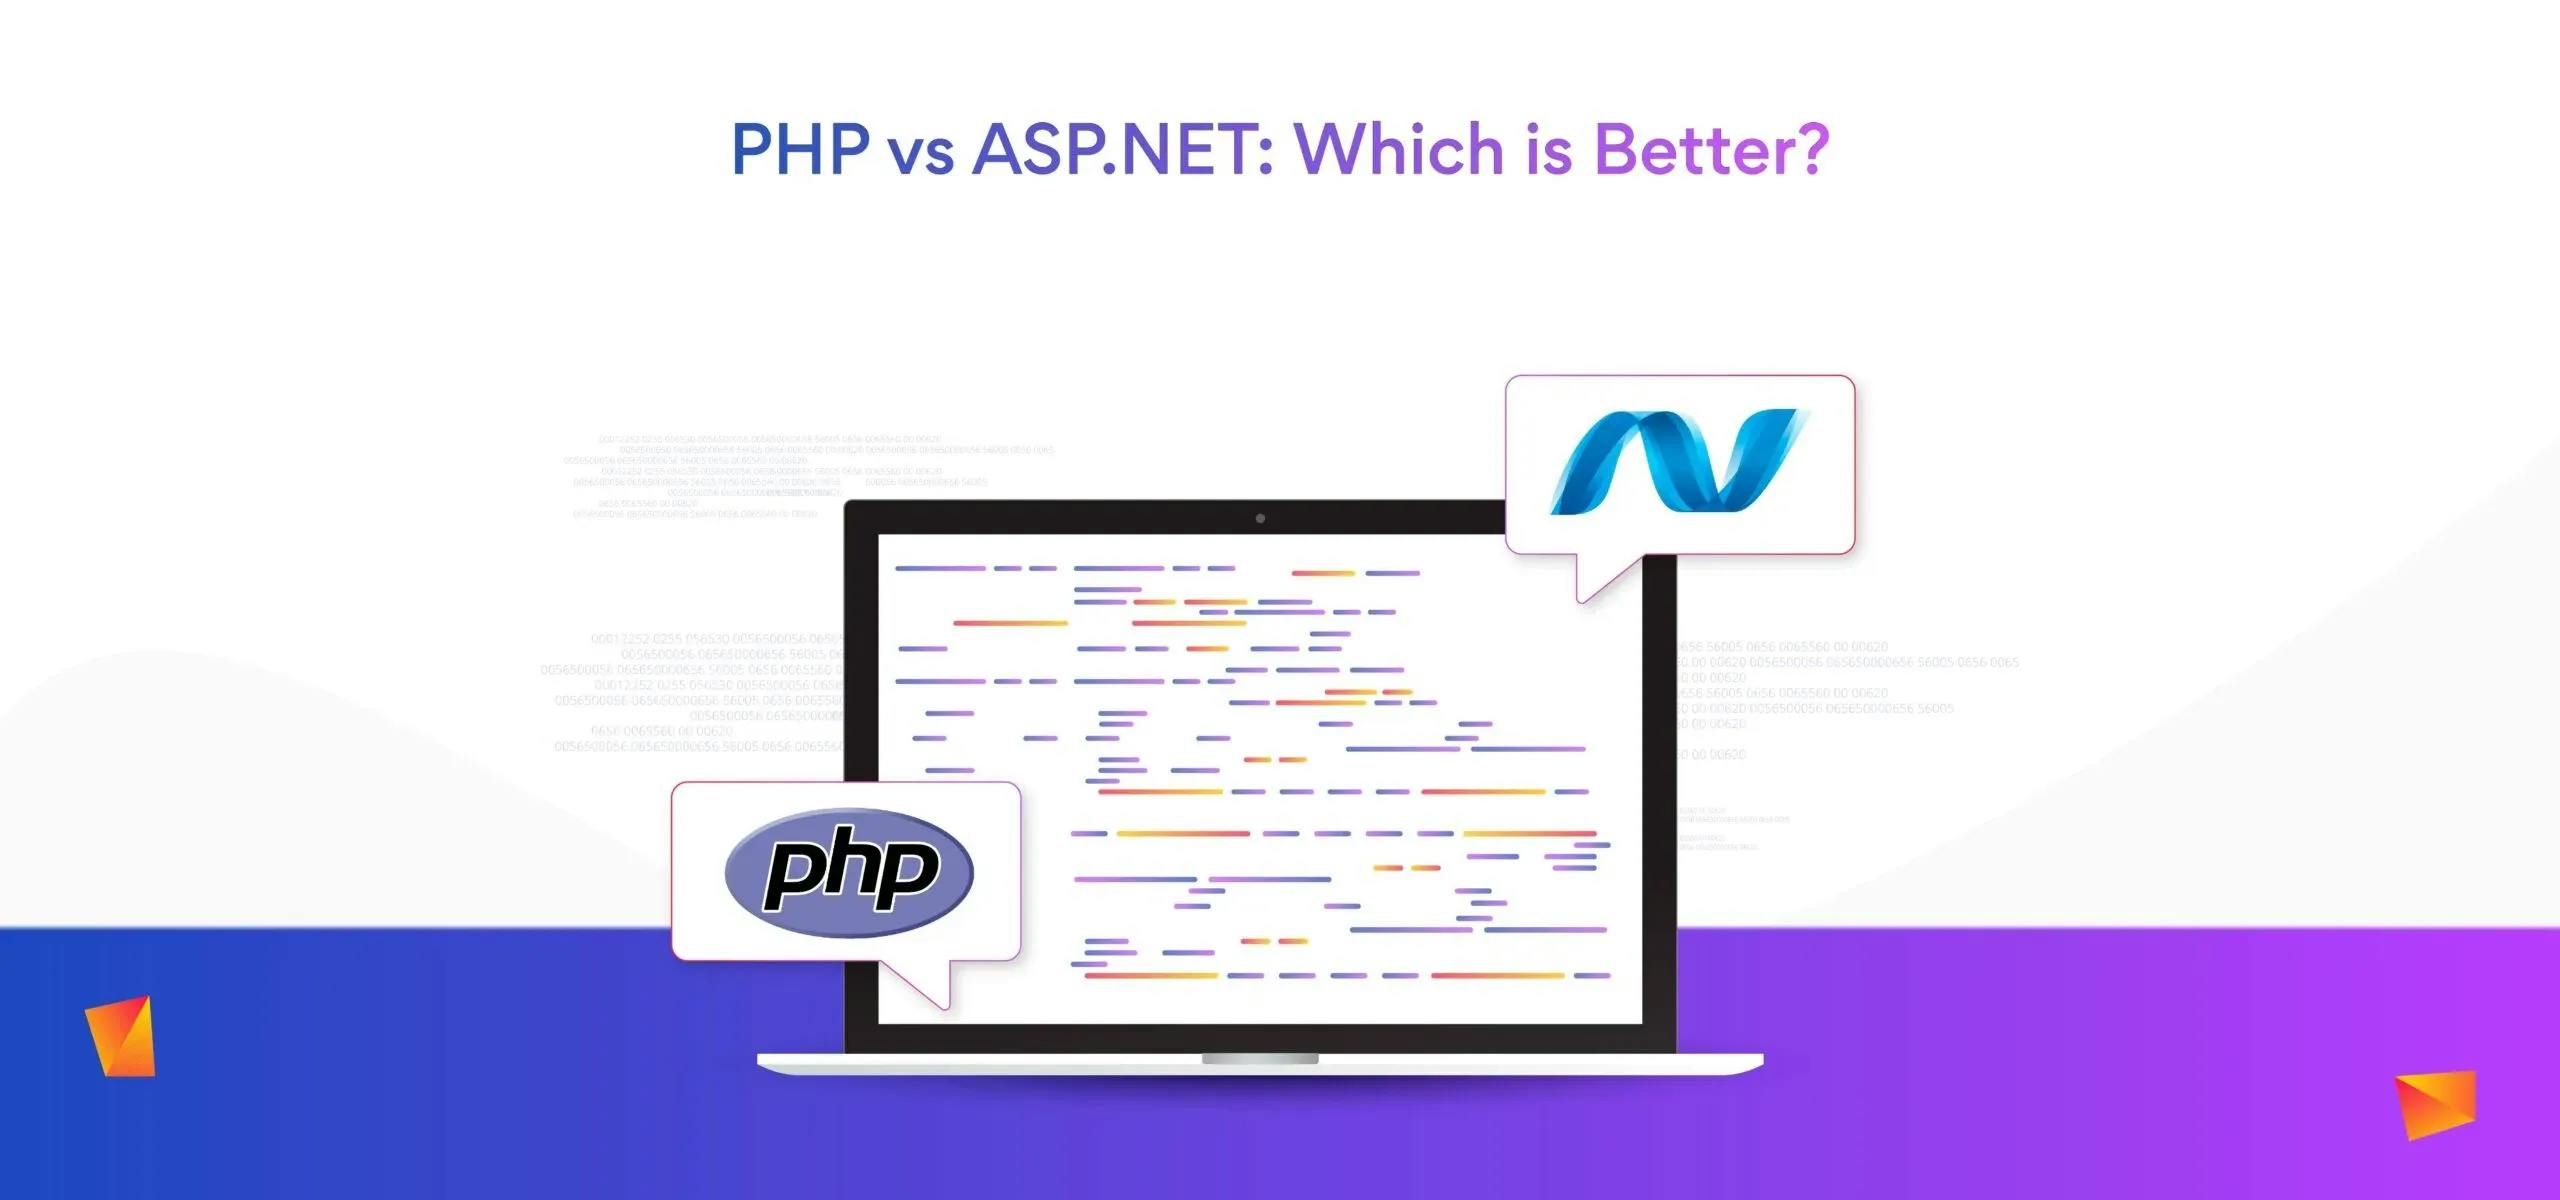 PHP vs ASP.NET: Which is Better?